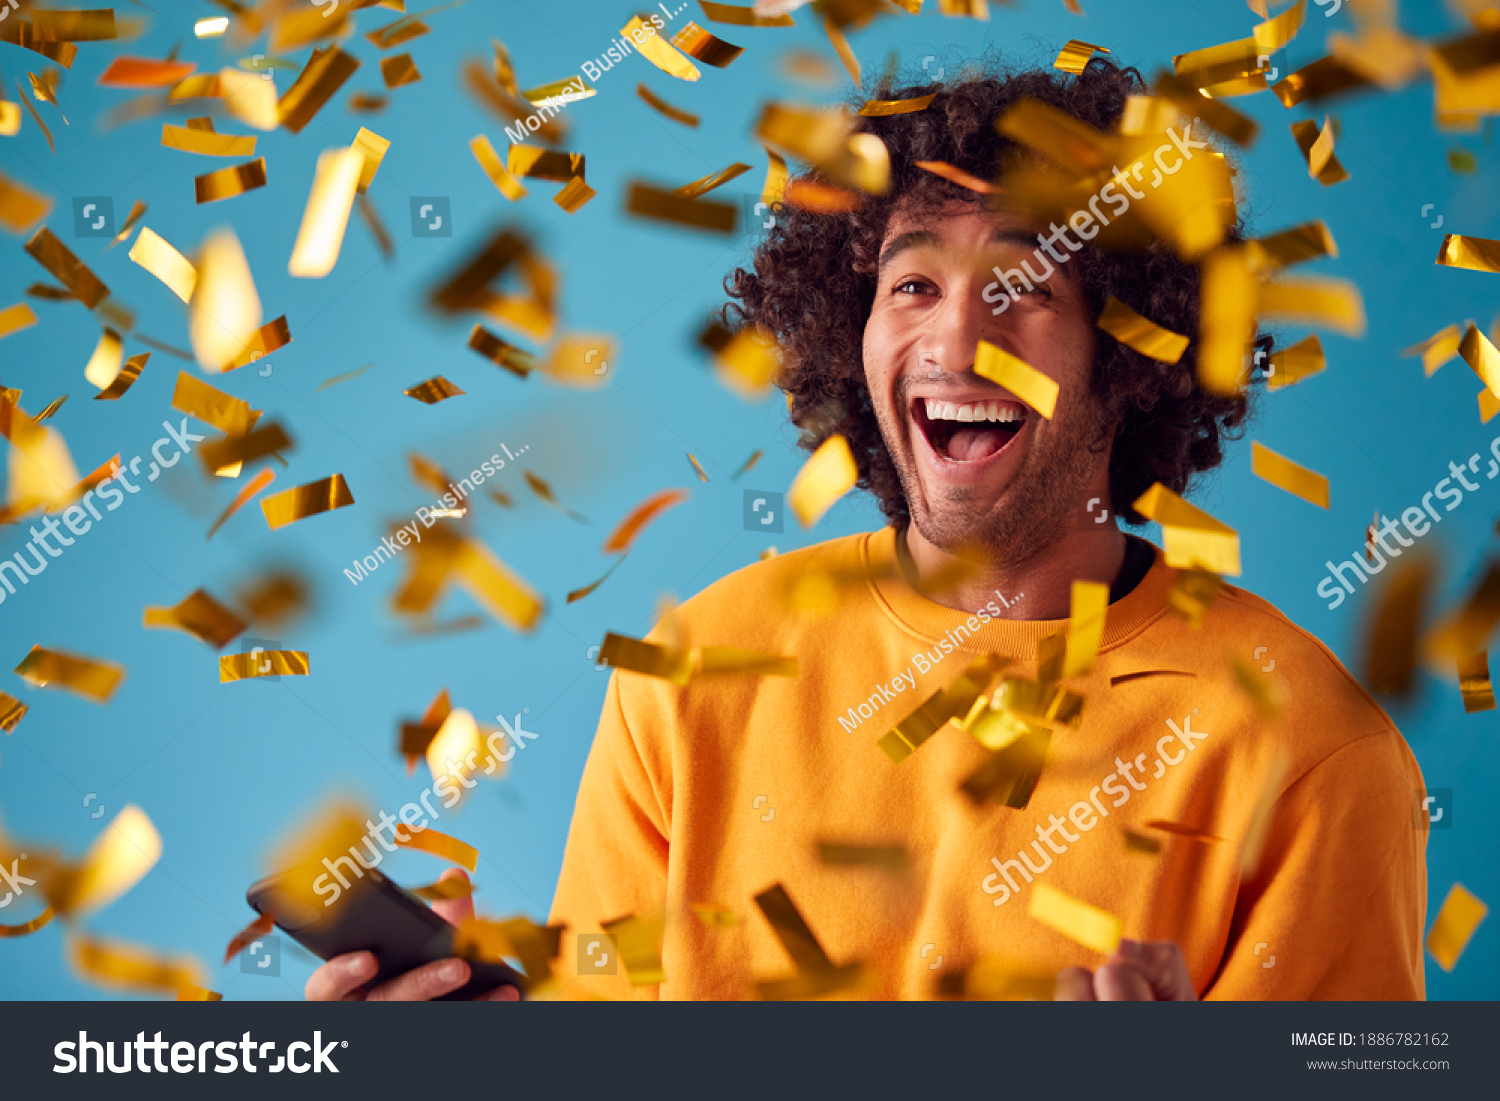 Celebrating Young Man With Mobile Phone Winning Prize And Showered With Gold Confetti In Studio #1886782162